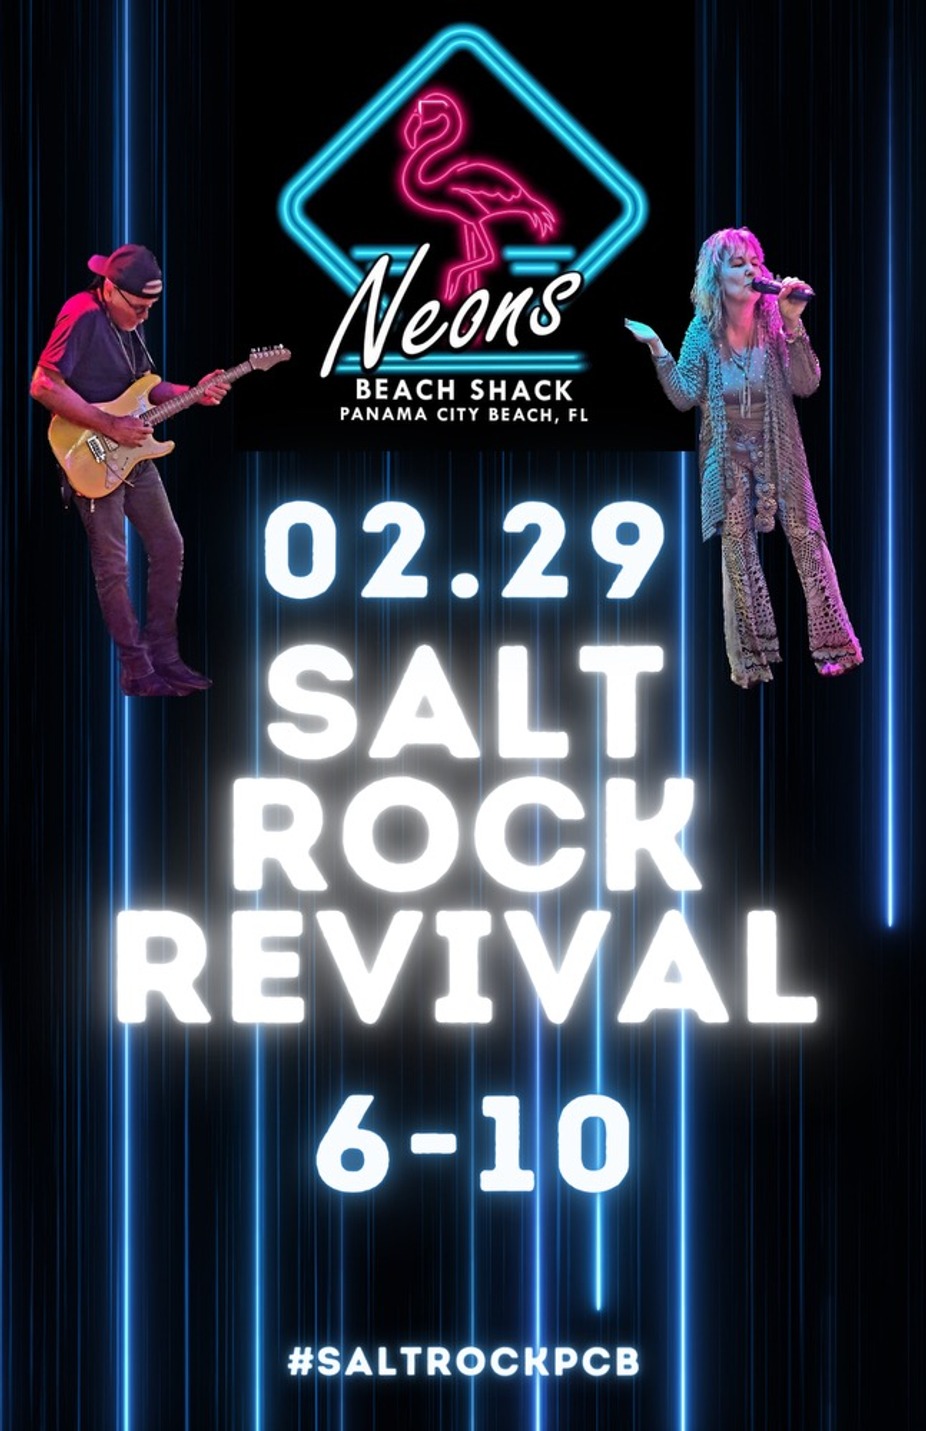 Salt Rock Revival Live on The Main Stage event photo